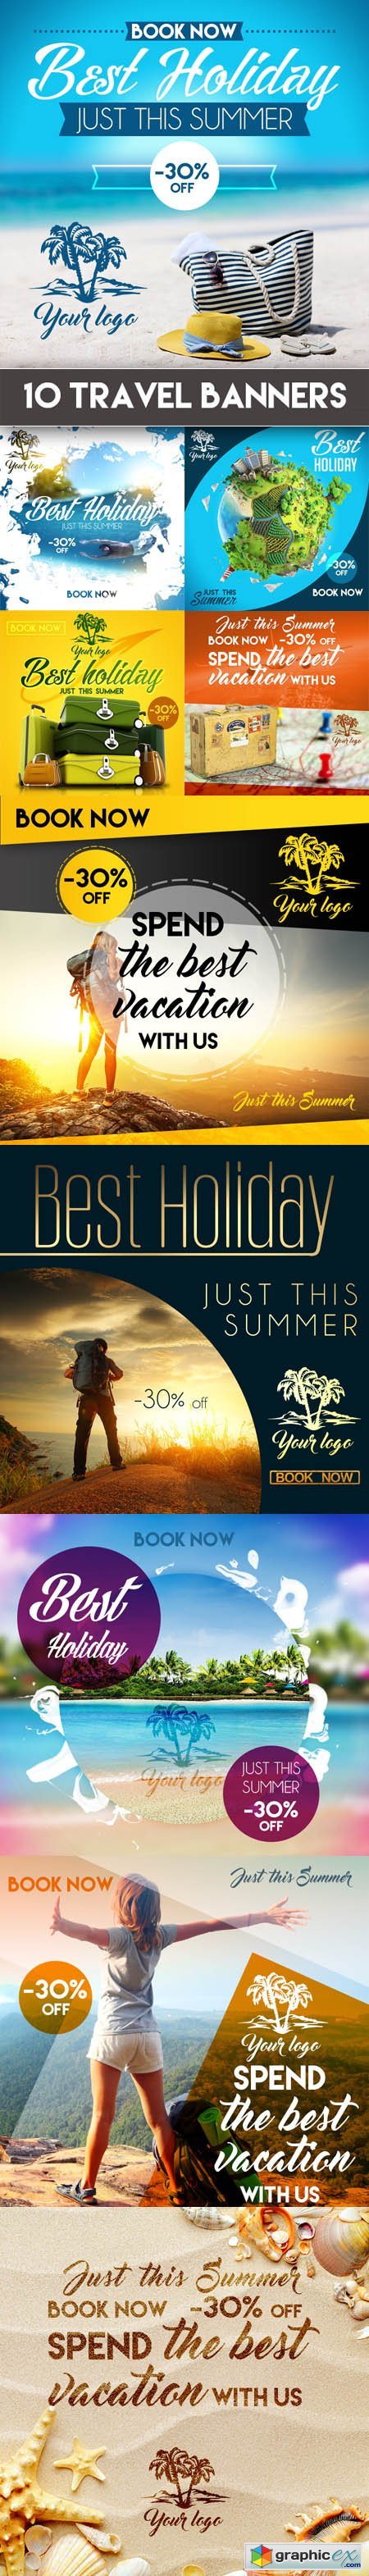 10 Travel Banners PSD Templates